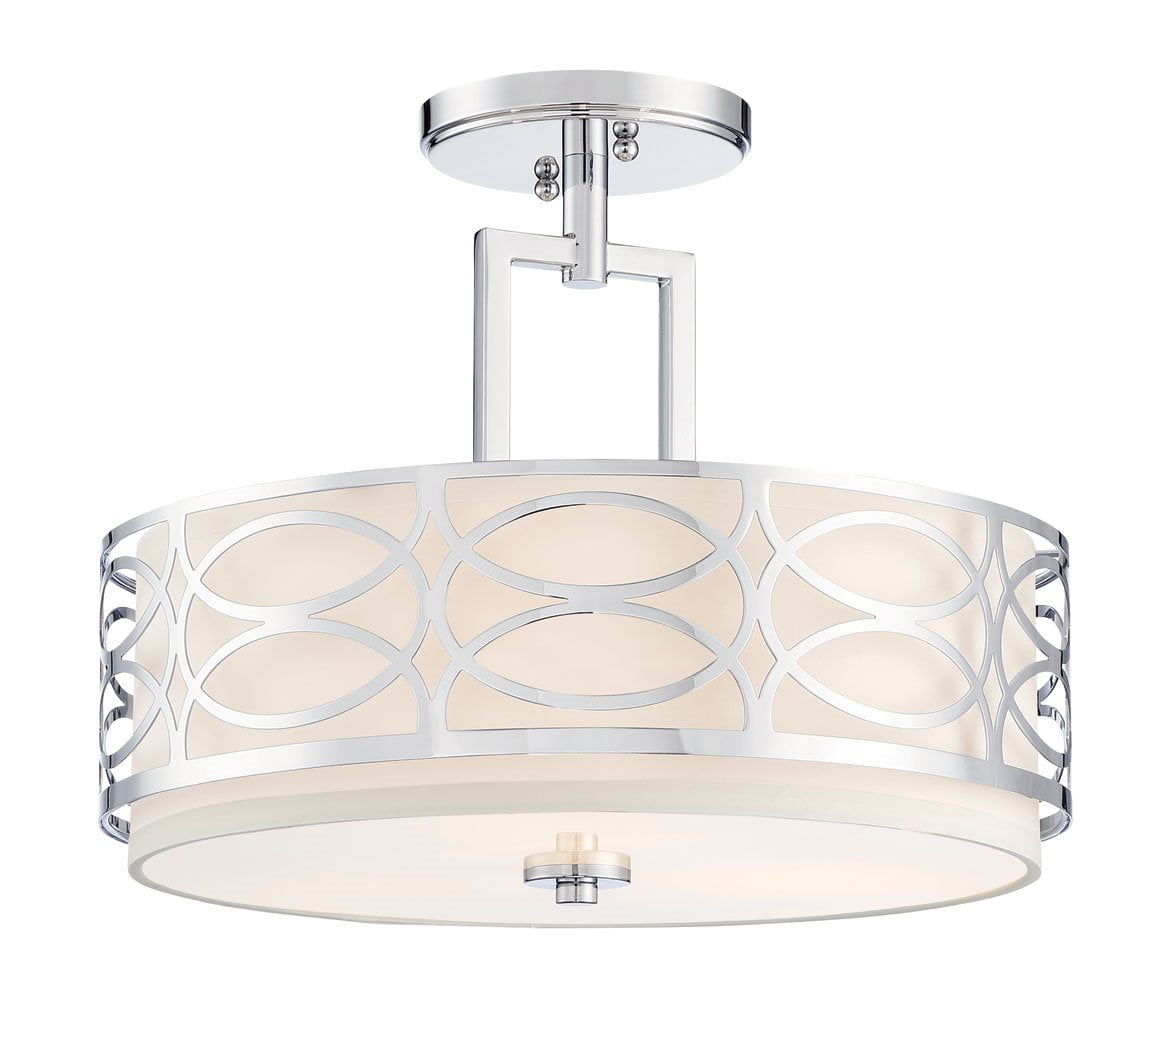 Outer Mesh Shade and ... Revel Linx 16" Semi-Flush Mount Ceiling Light Fixture 